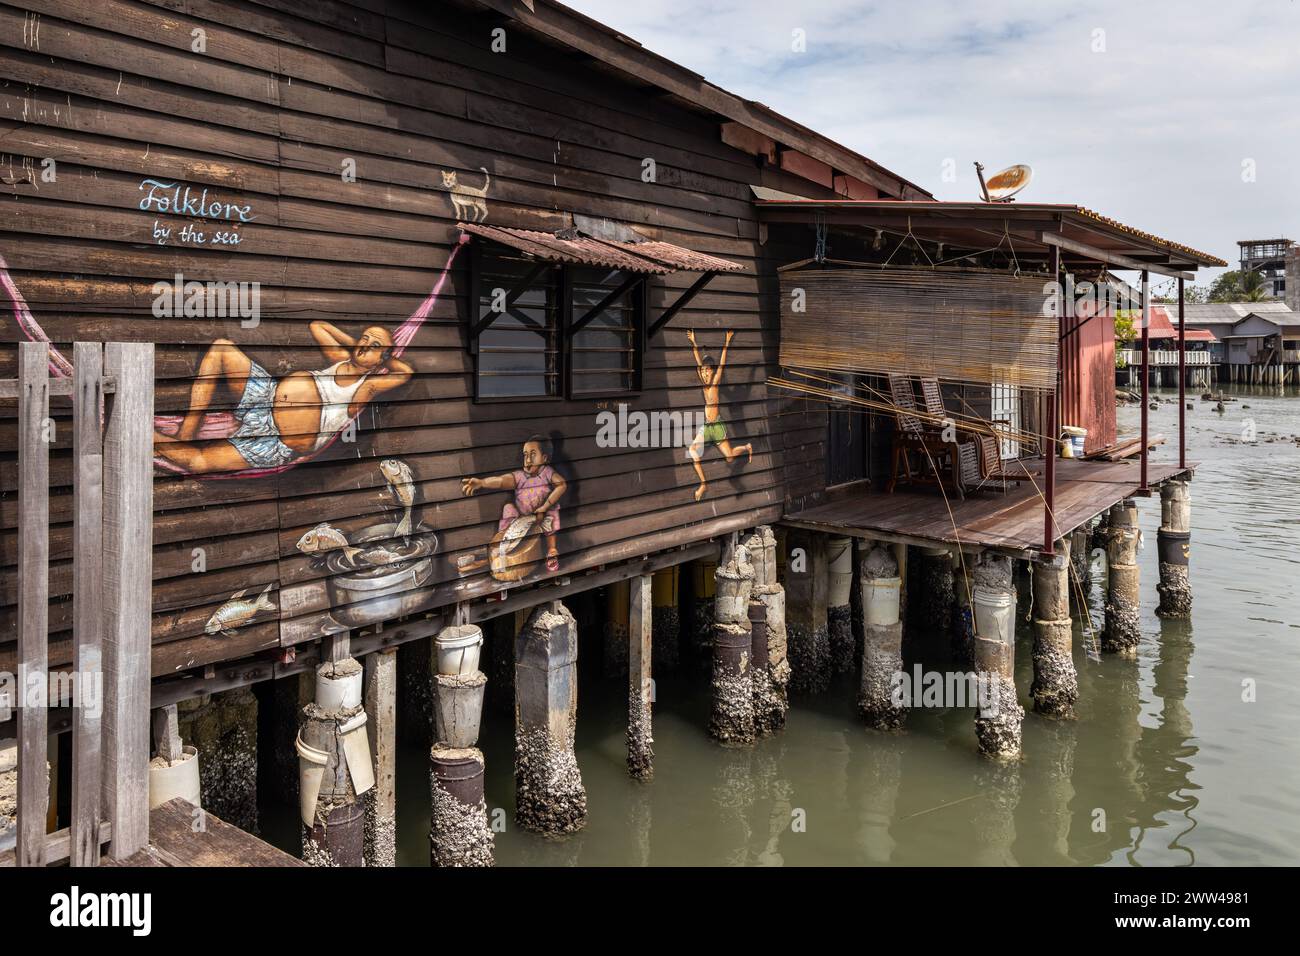 Folklore by the Sea Mural des singapurischen Künstlers Yip Yew Chong - Street Art on Chew Jetty in Georgetown, Penang, Malaysia Stockfoto